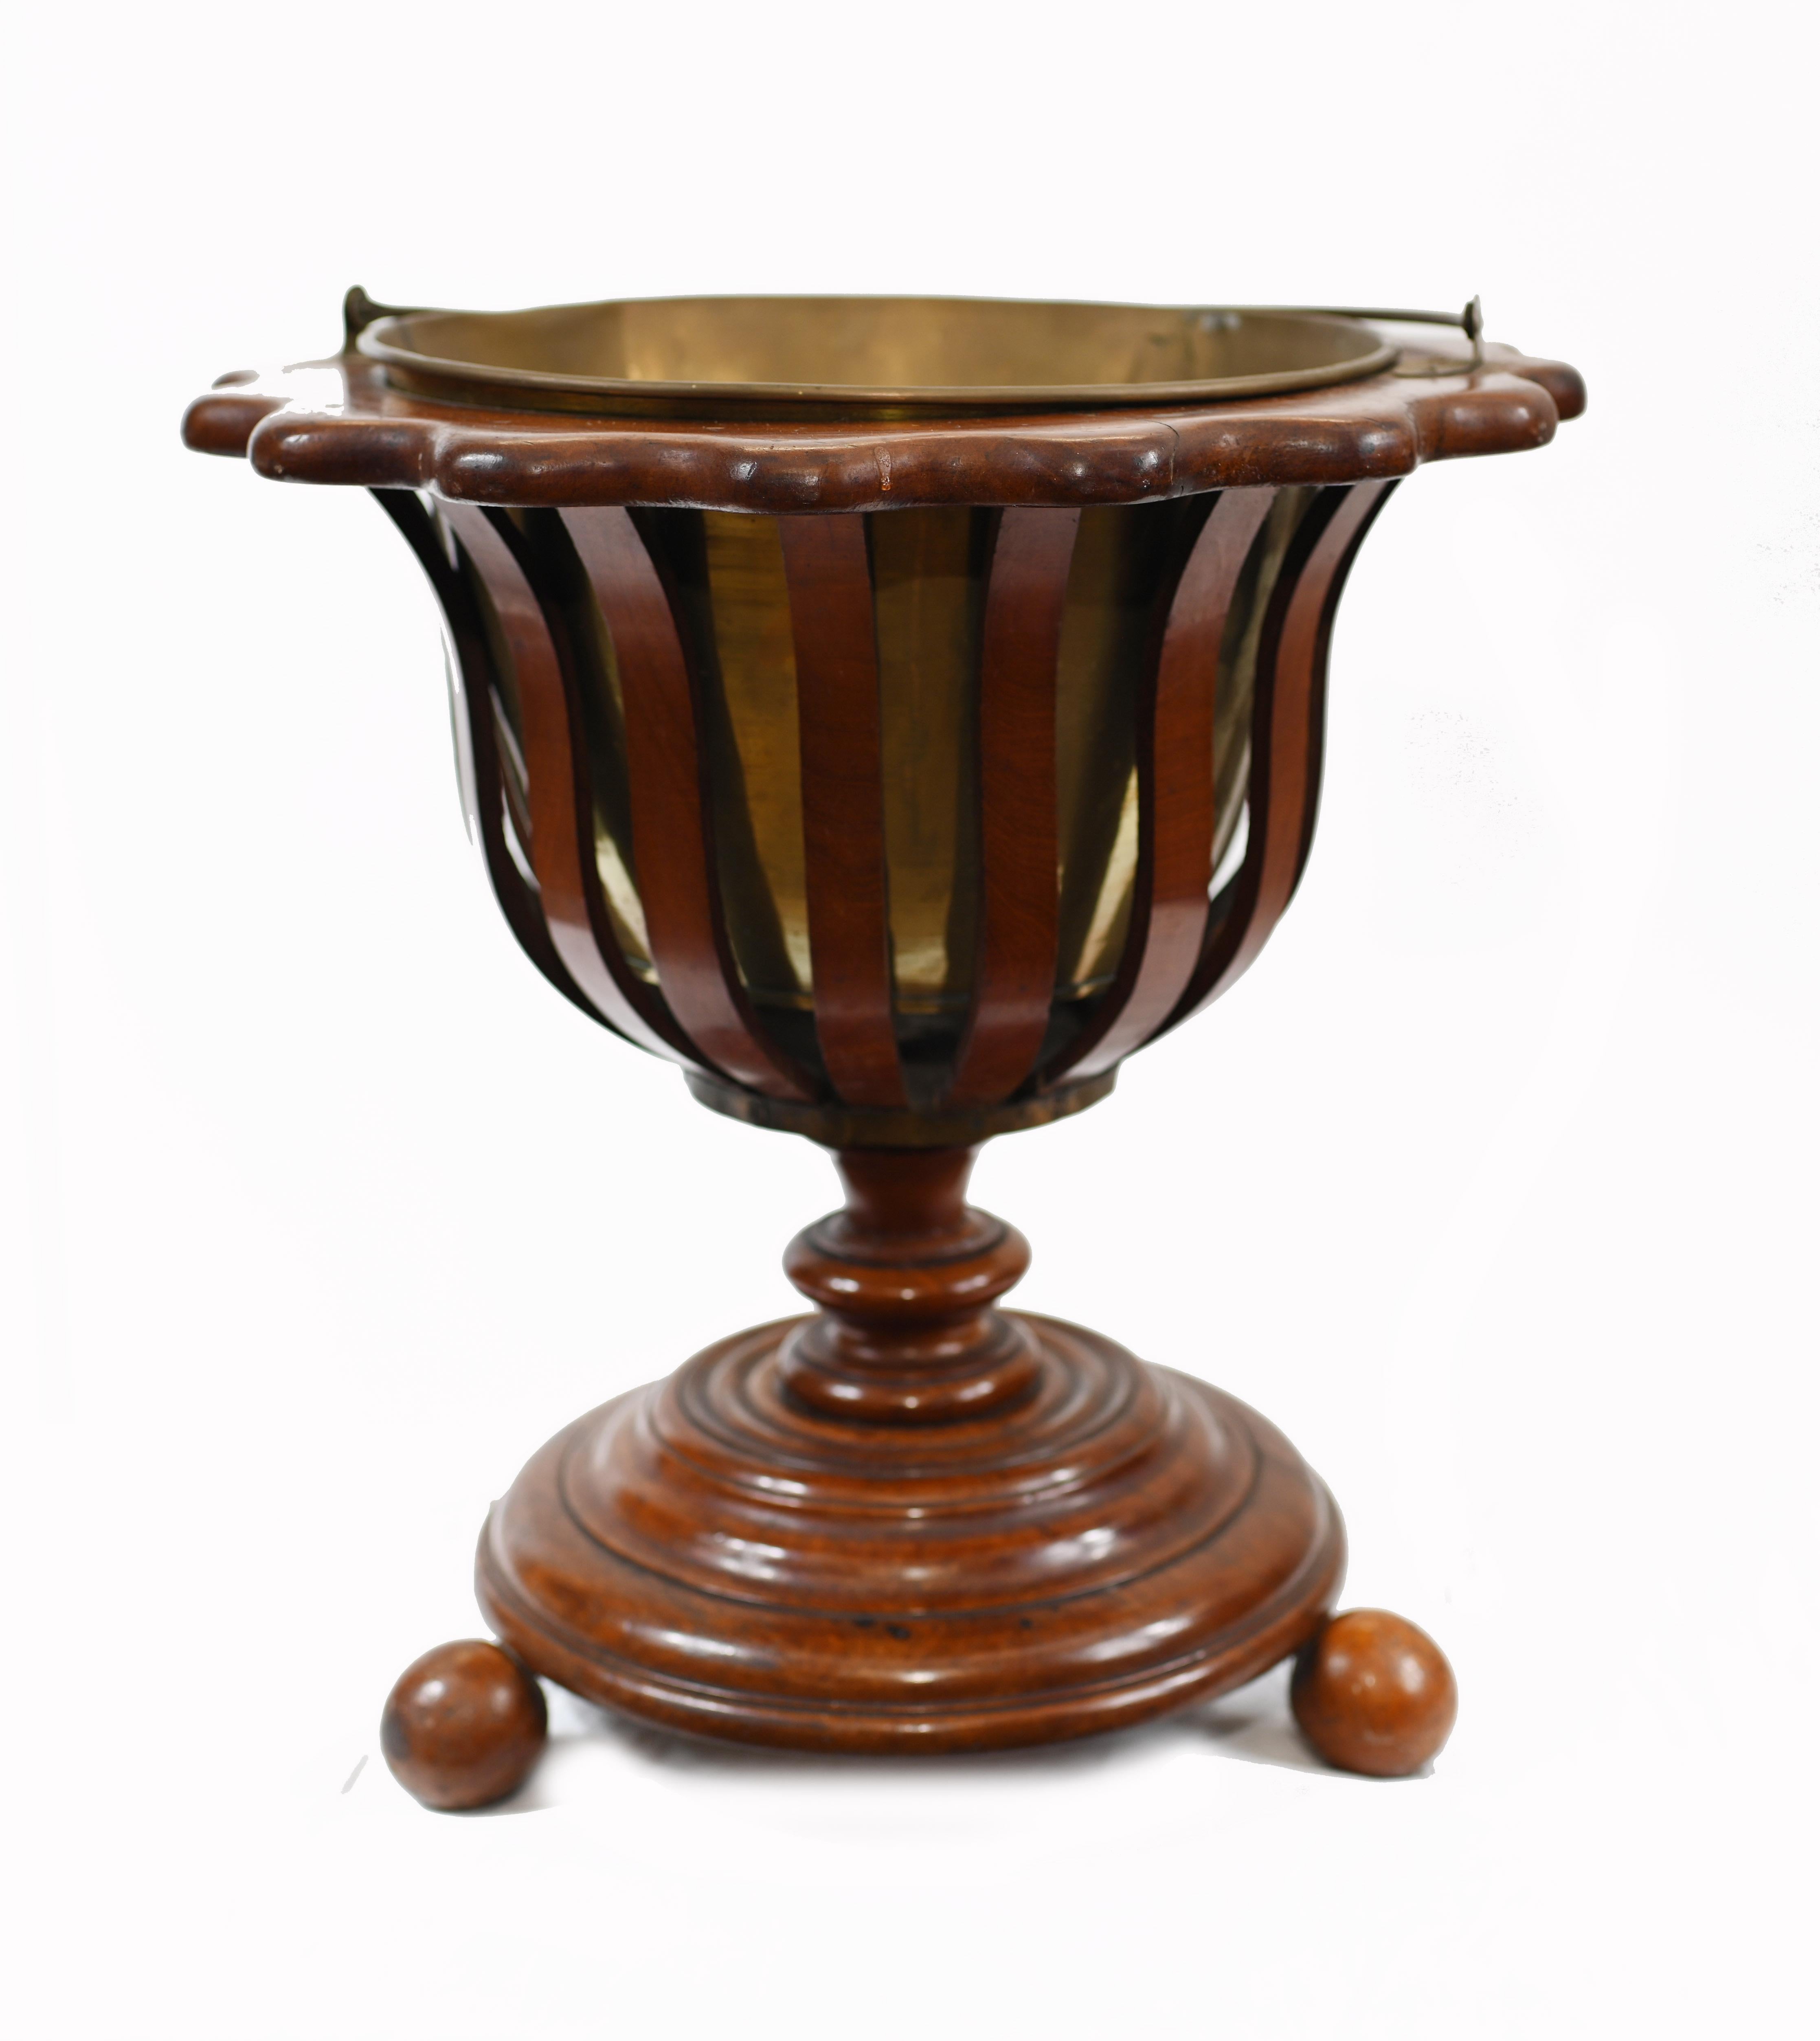 These buckets were originally used as braziers for holding charcoal and a tea-kettle
Crafted from moulded staves of ebony, walnut and holly and has original brass liner
Make for a great decorative piece or as a planter
We date this to circa